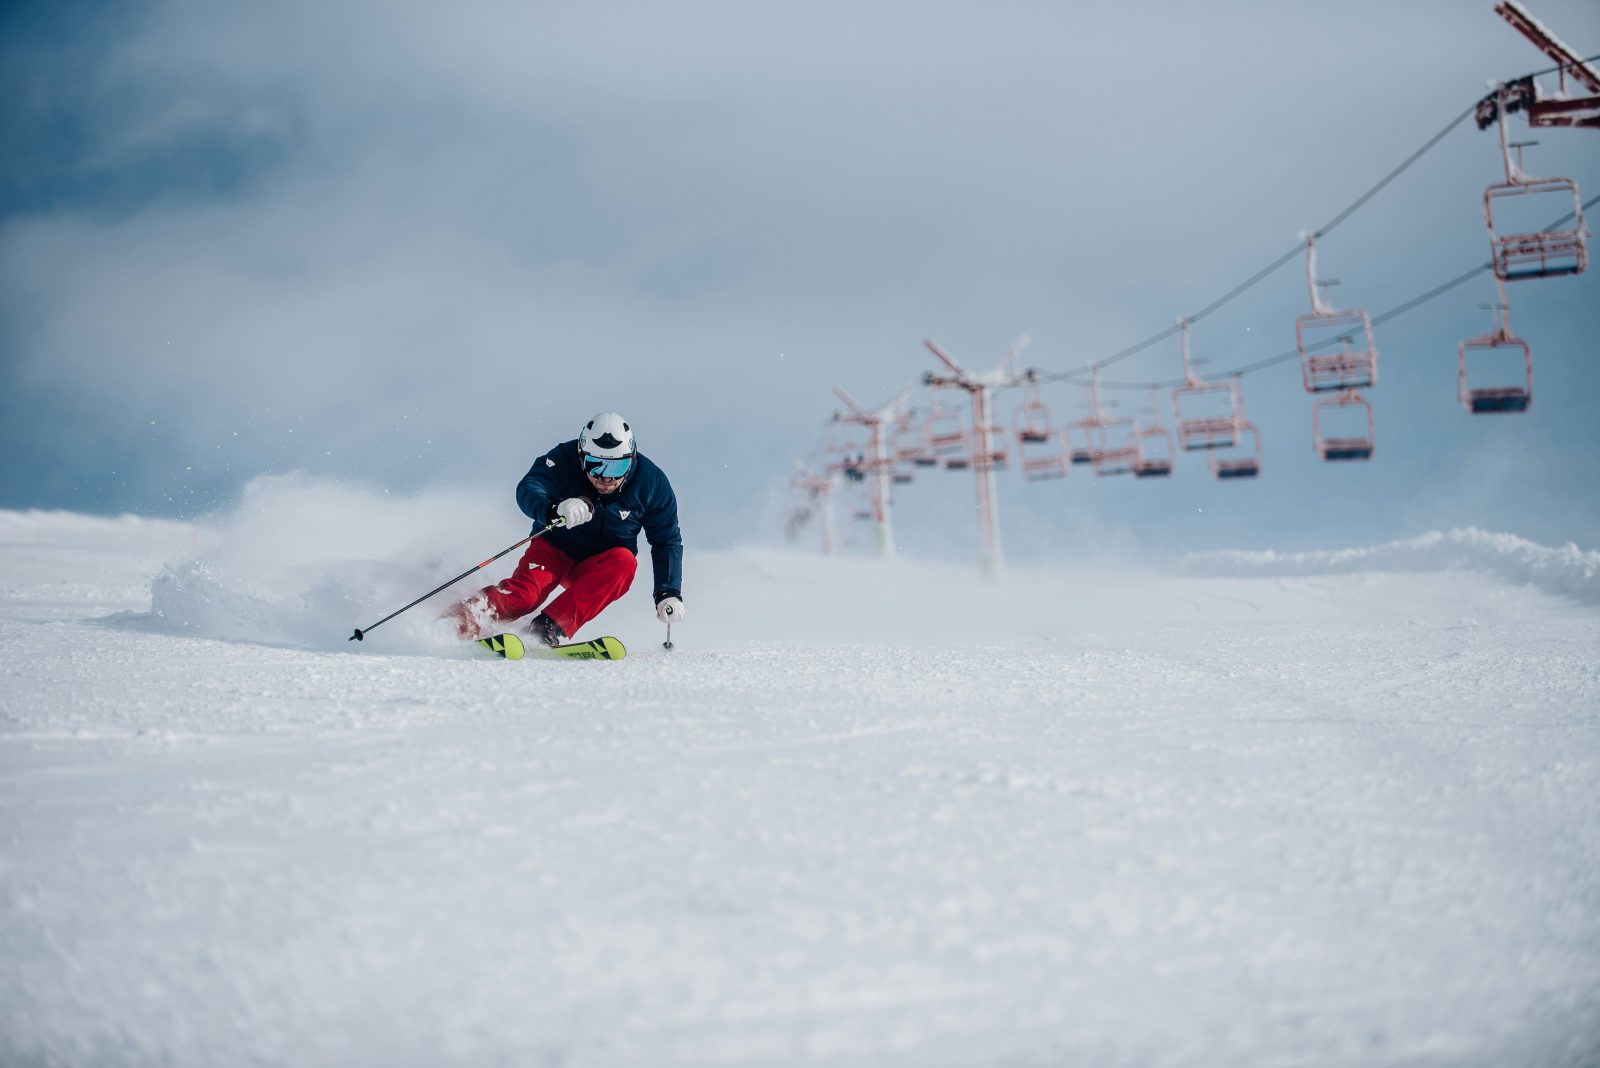 How to Carve on Skis Like a Pro